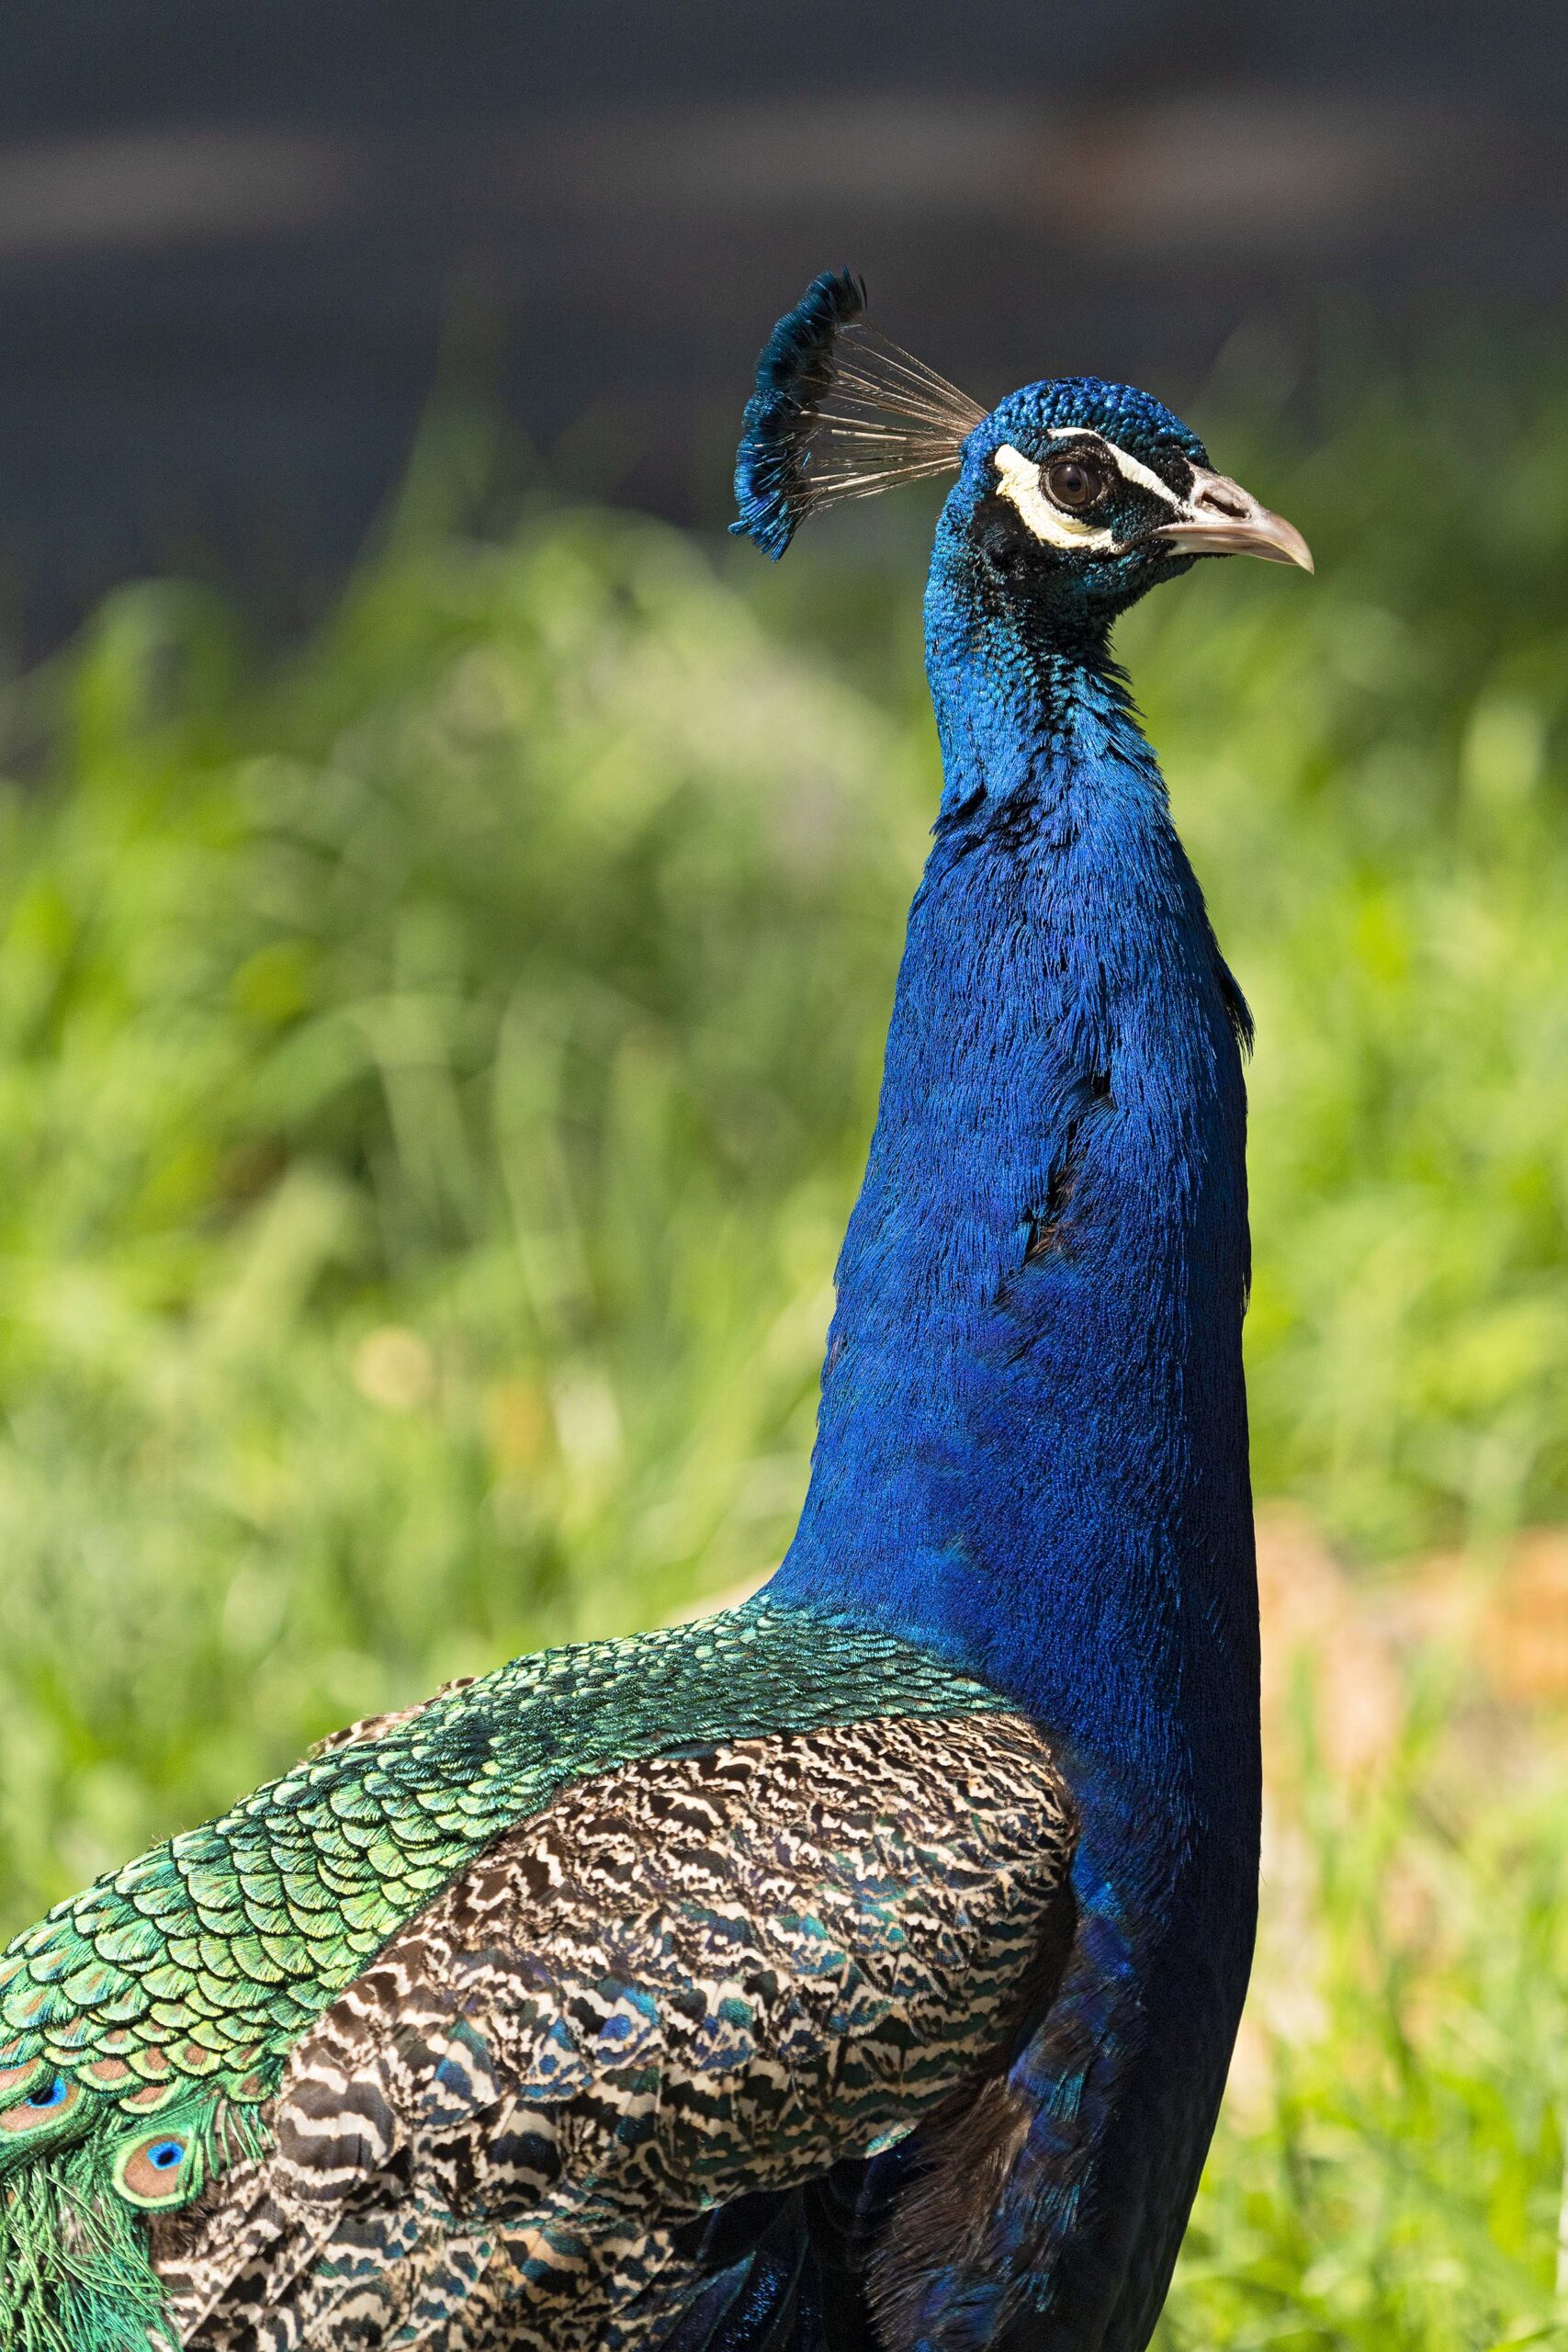 A peacock at Allen Park in Salt Lake City in color.